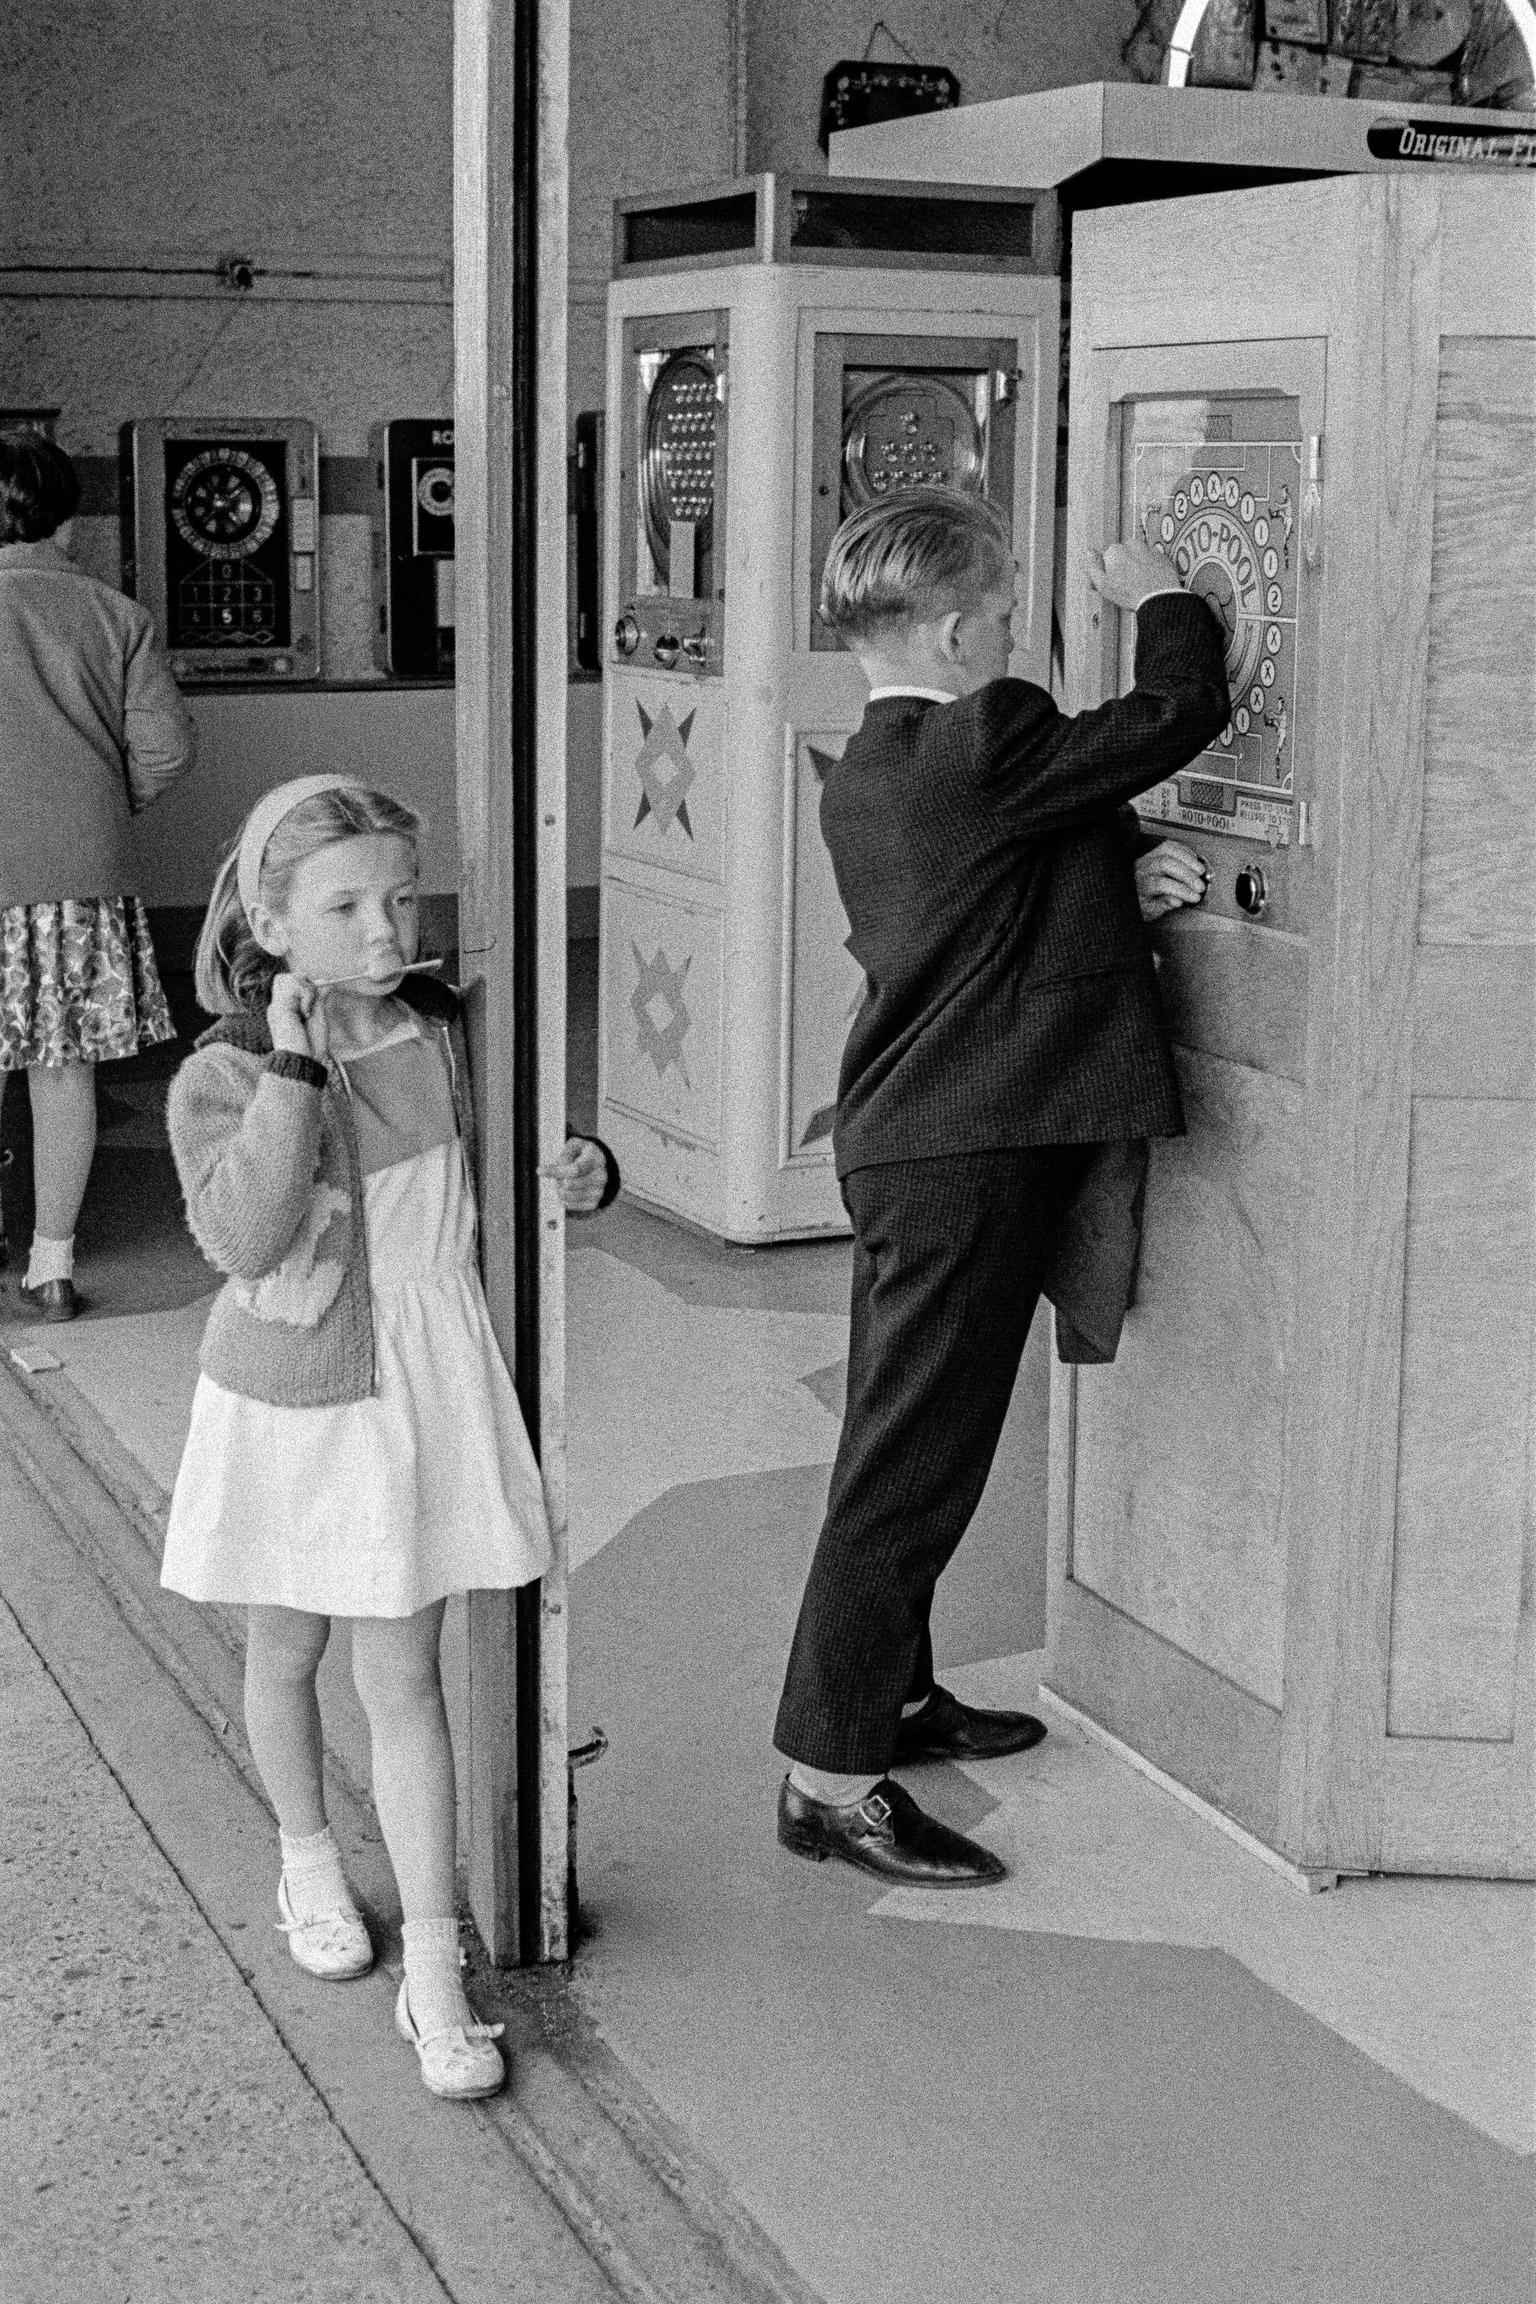 Children playing in the amusement arcade. Herne Bay, UK